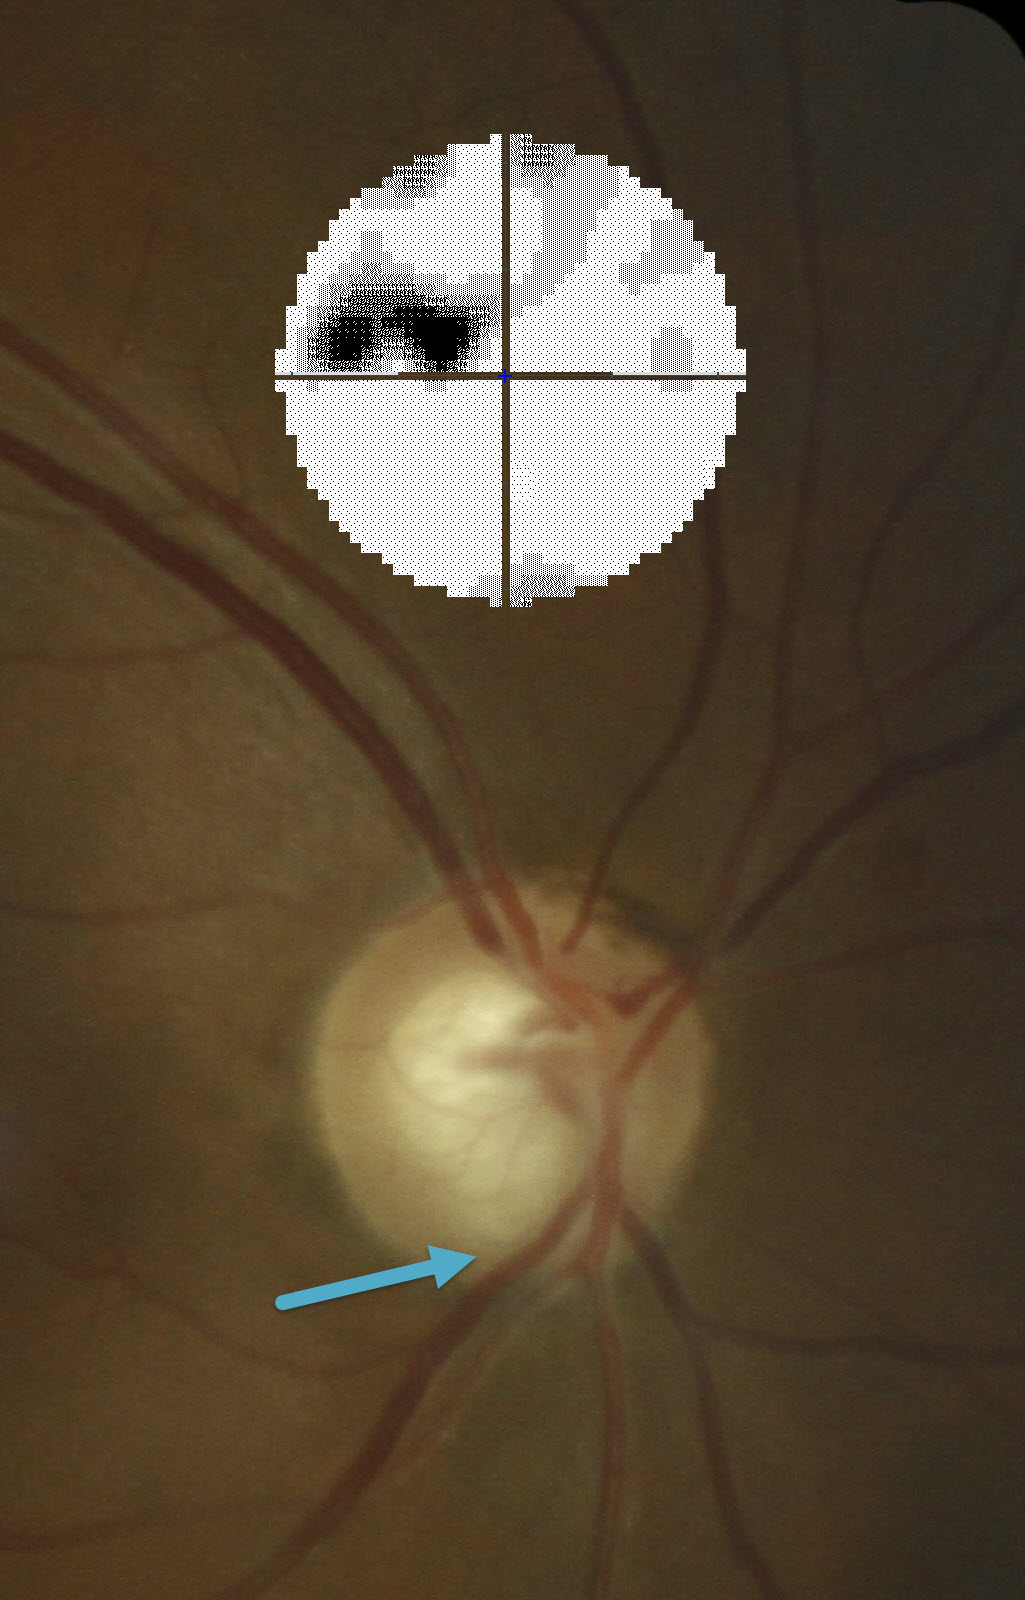 Image of a Optic Nerve with Glaucoma